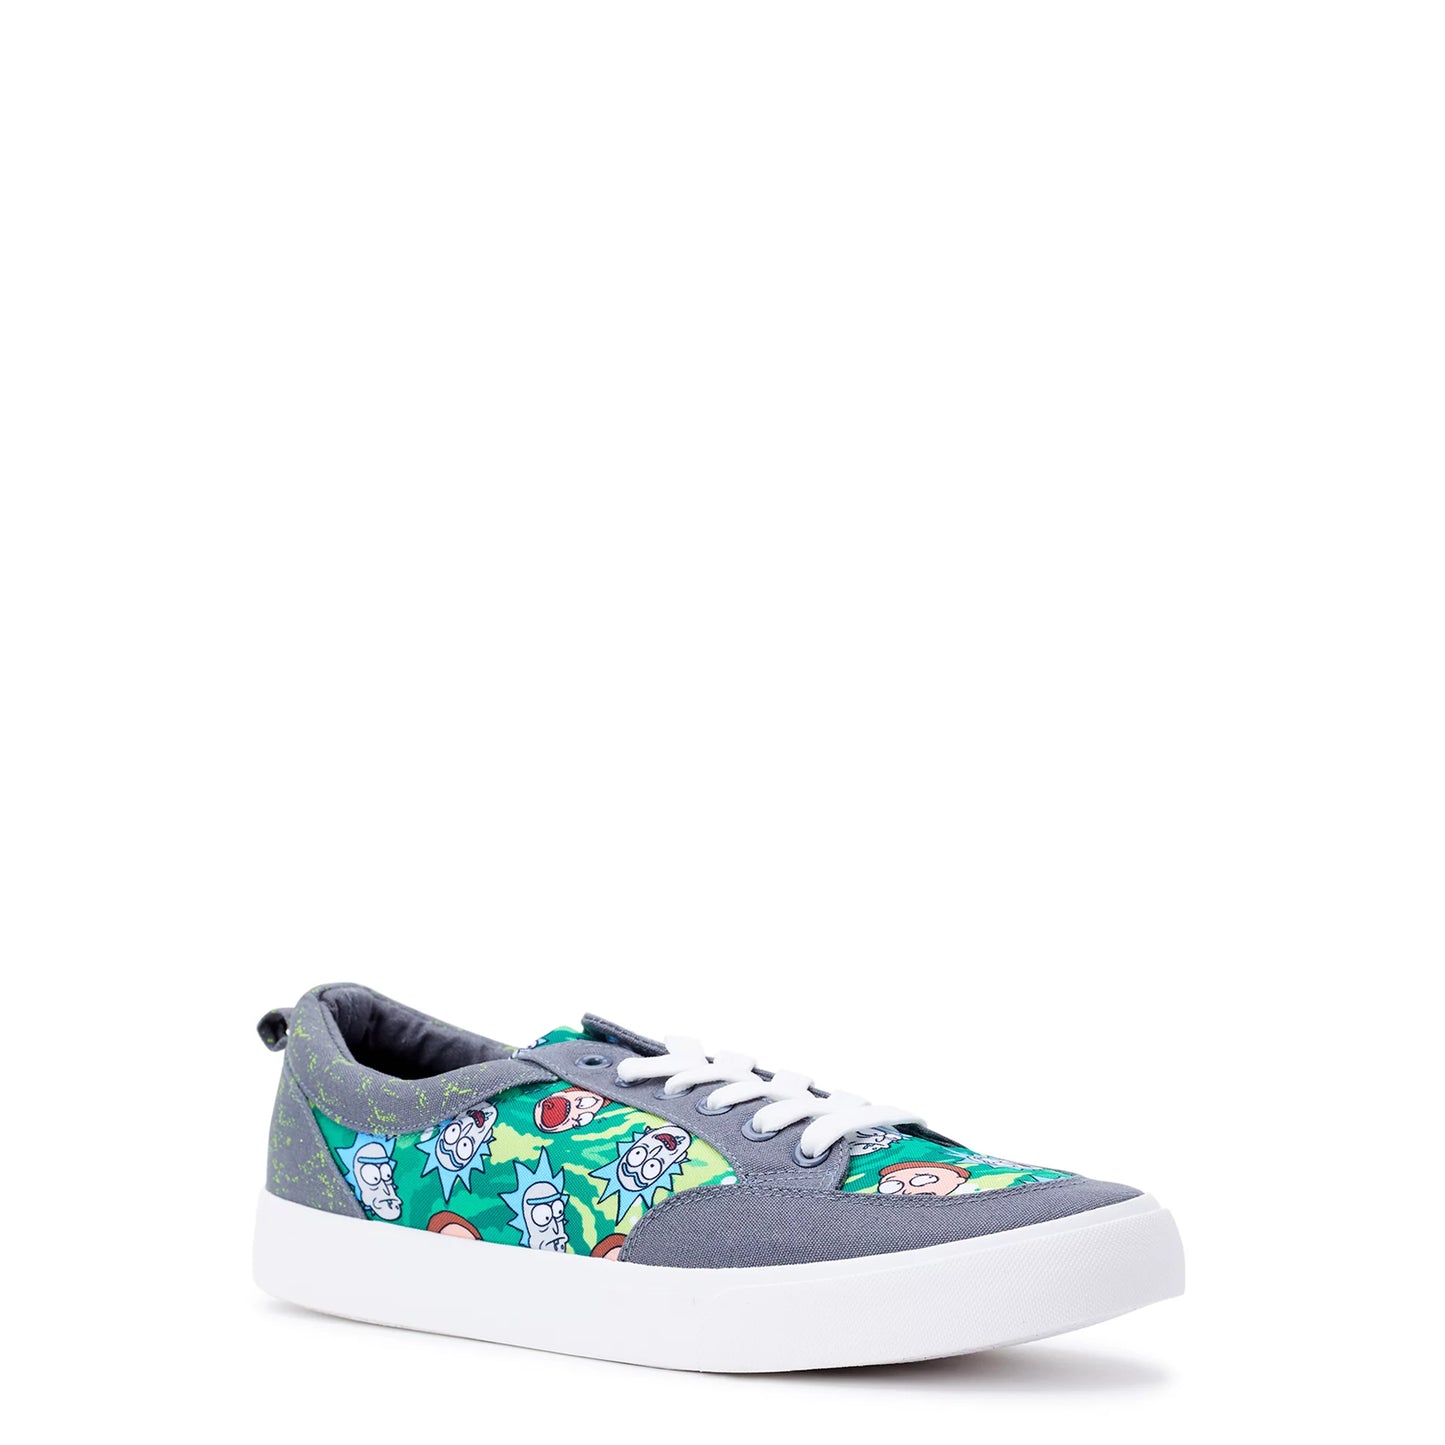 Rick and Morty Men's Canvas Slip On Shoes